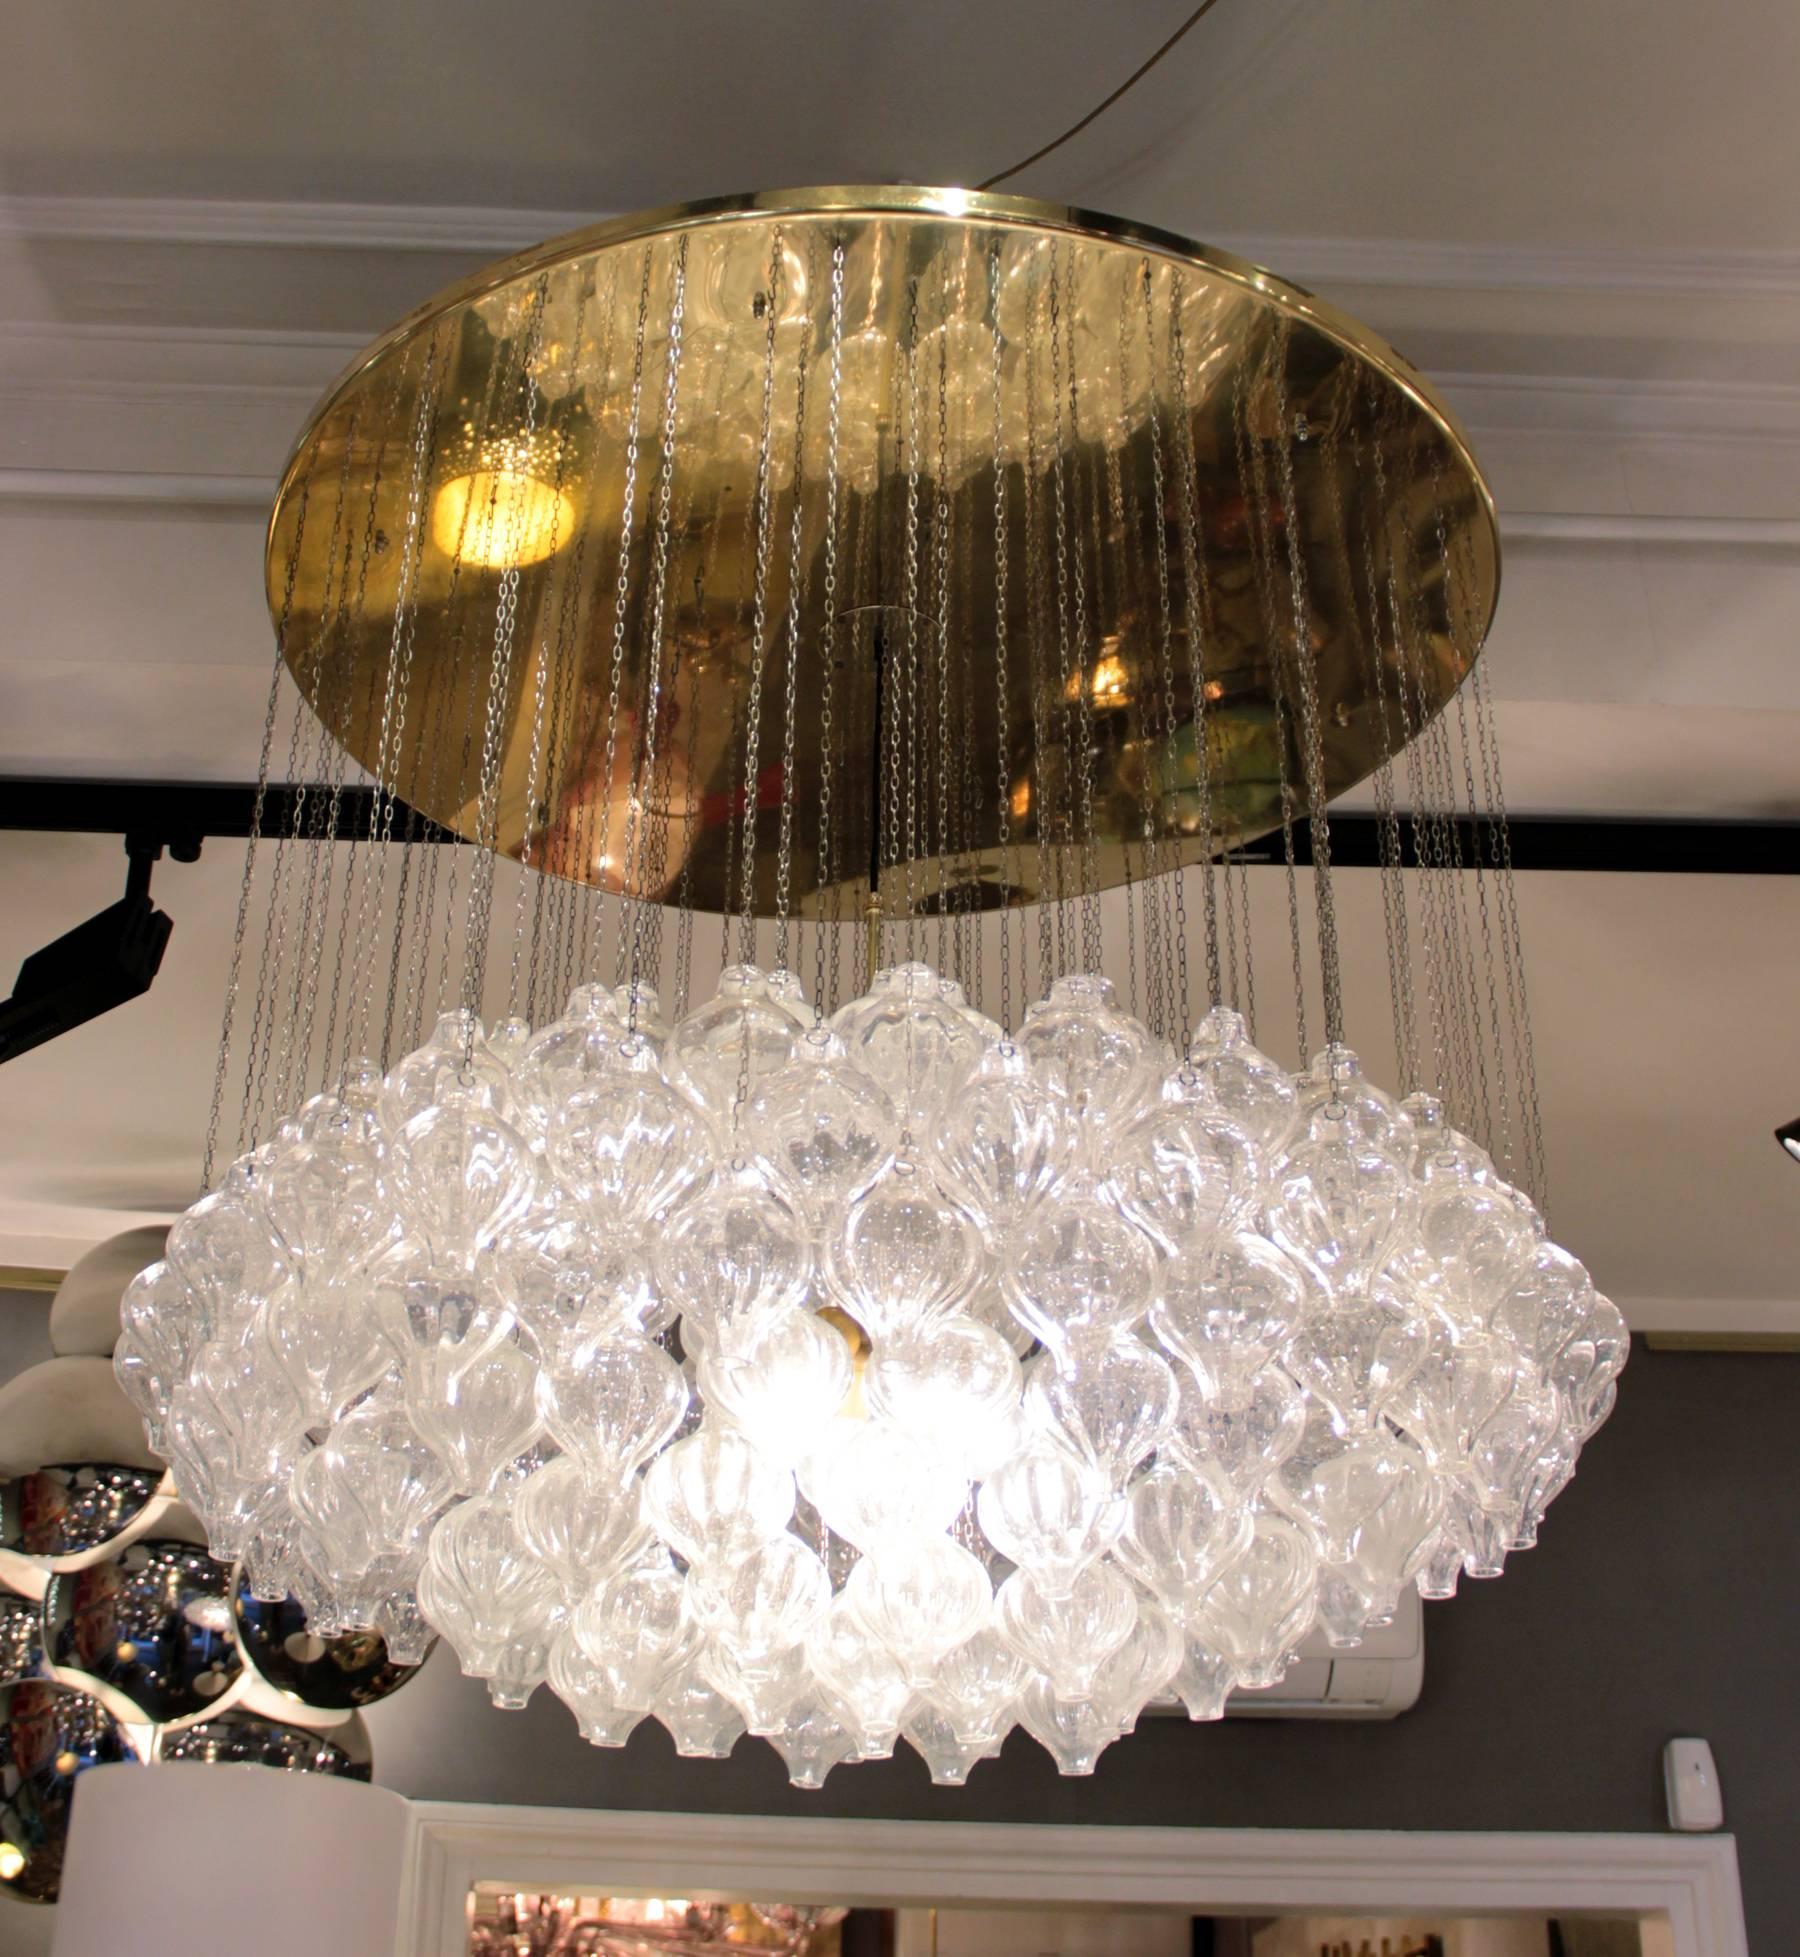 Rare large 'Tulipan' glass pendant chandelier or flush mount by J.T. Kalmar, Austria, Vienna, manufactured in 1960s.
The name Tulipan derives from the tulip shaped hand blown bubble glasses. Each glass is handmade and therefore a unique piece.
184